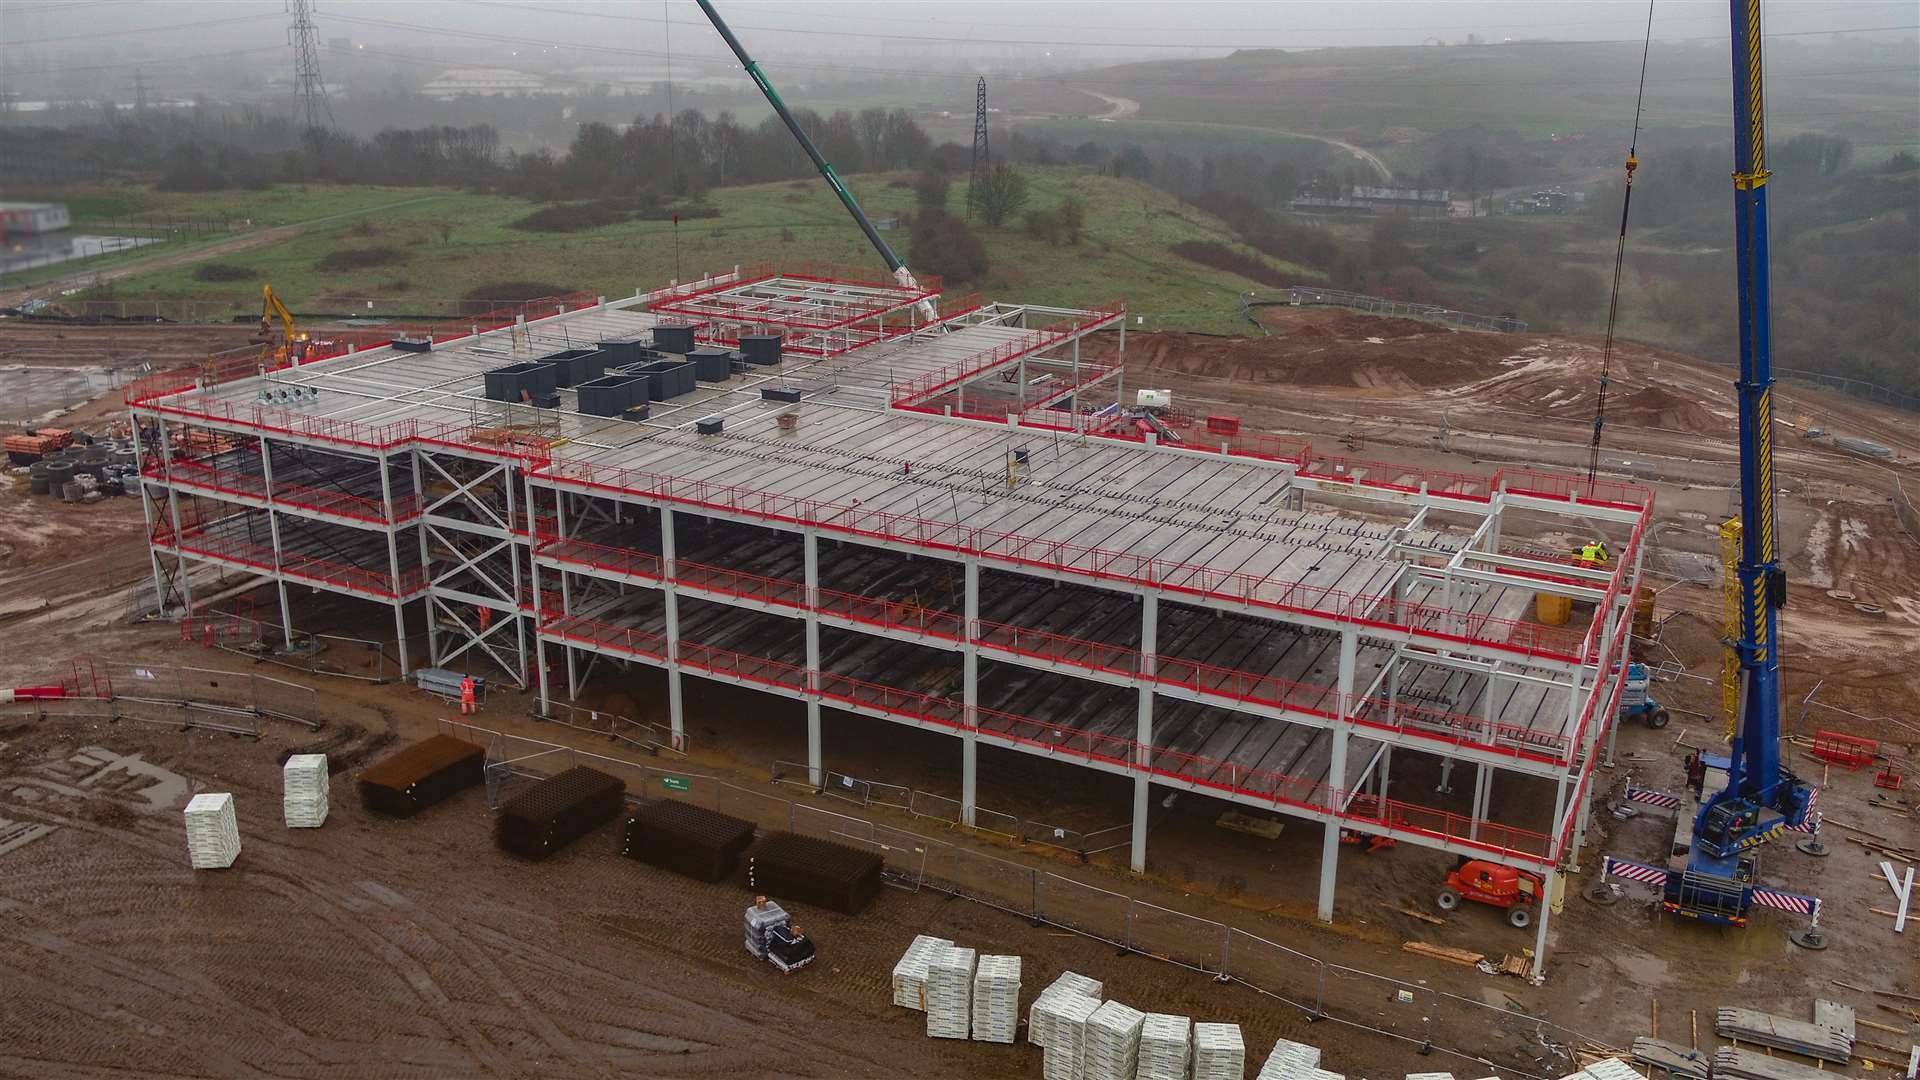 Stone Lodge Secondary School is under construction